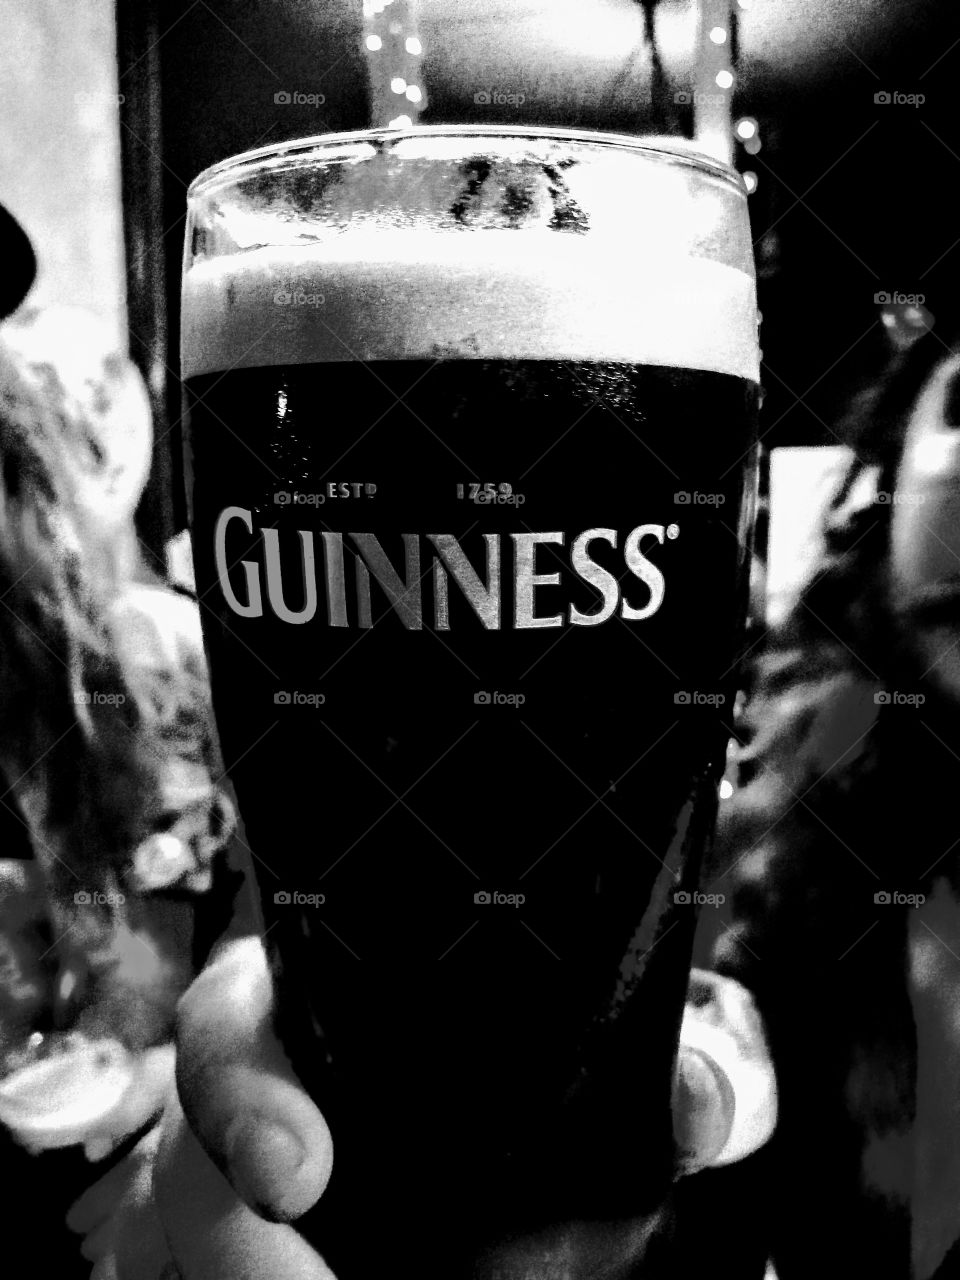 A pint of Guinness in monochrome on a cool late summers evening is just the thing.